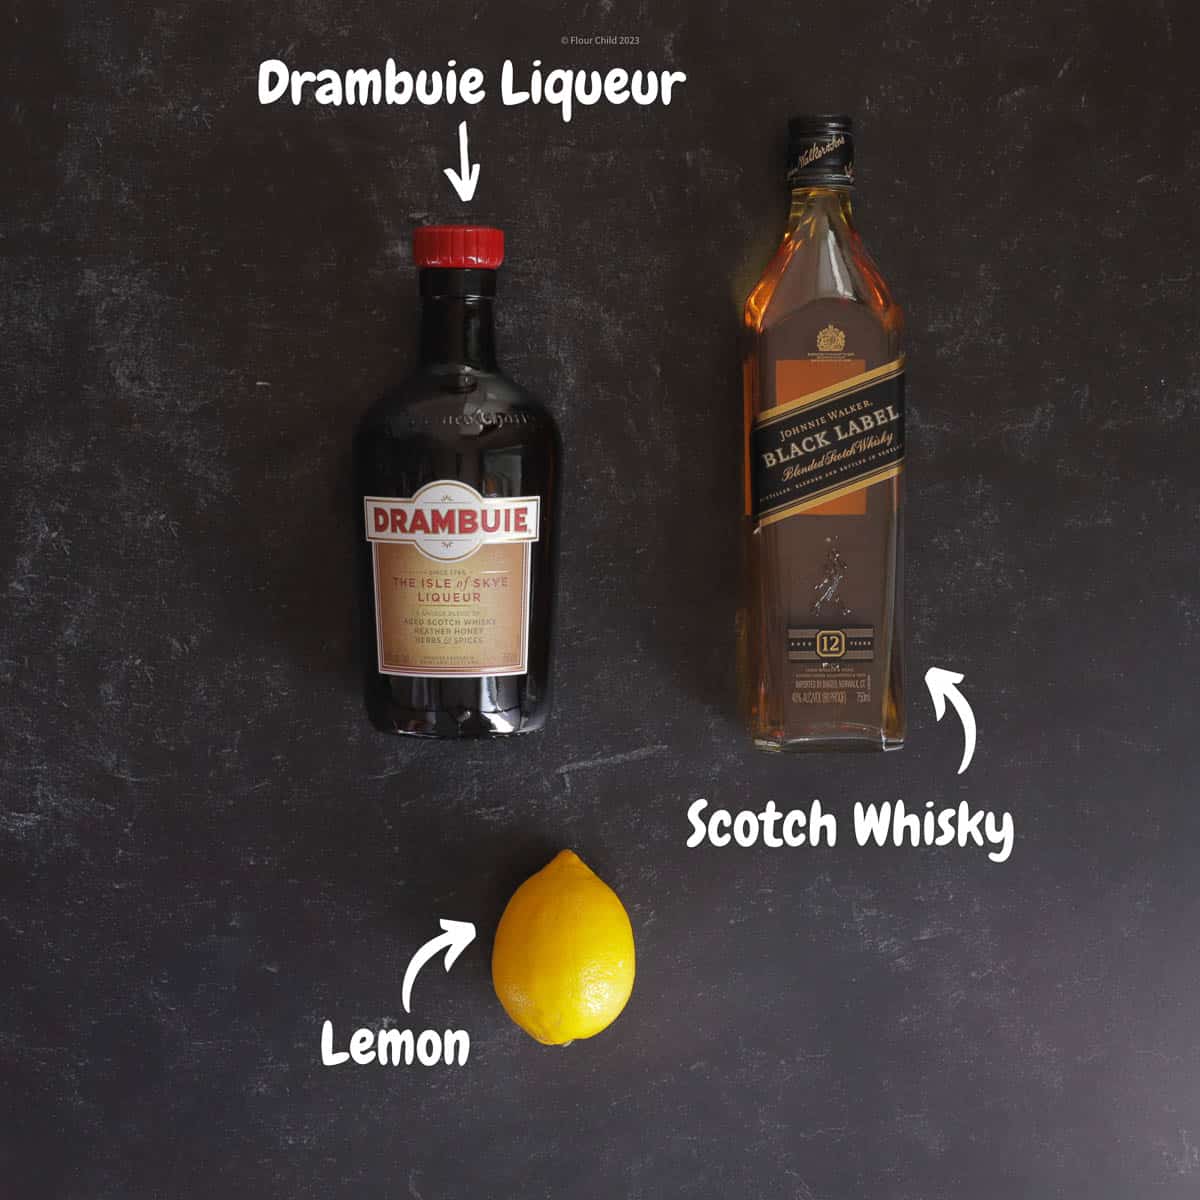 A bottle of Drambuie and a bottle of Johnnie Walker Black scotch with a lemon 